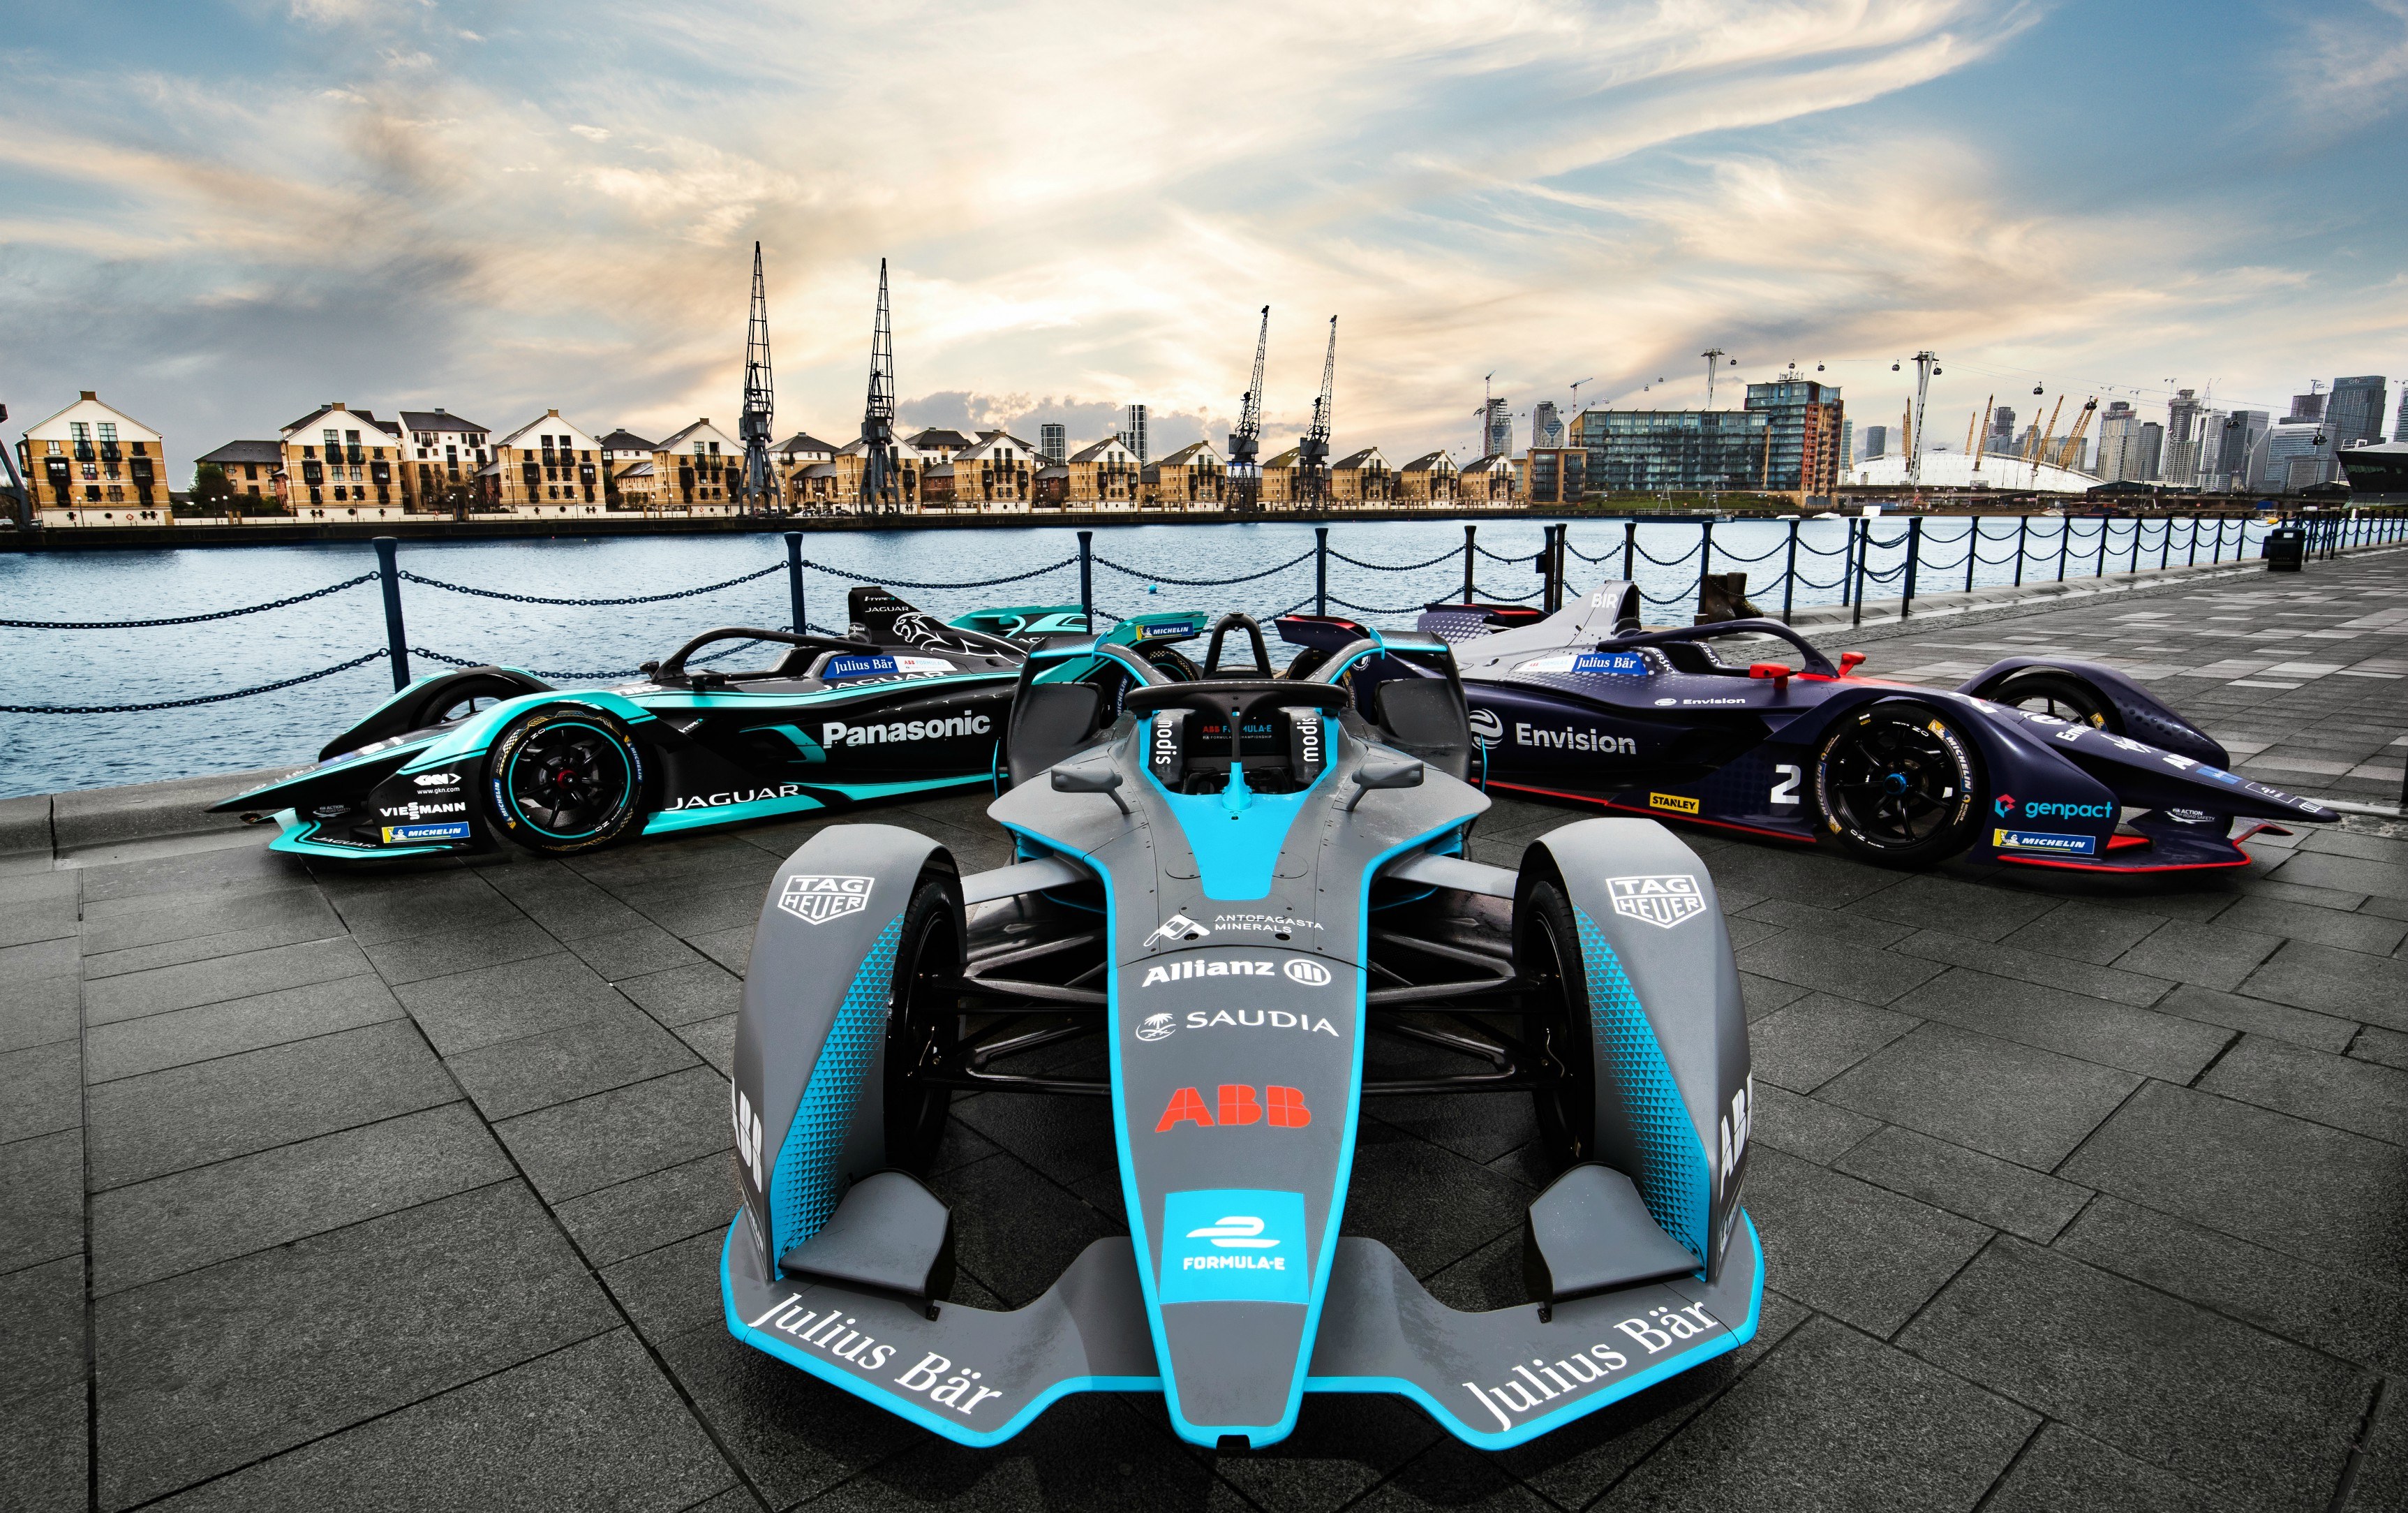 Three Formula E cars on display with the docks in the background